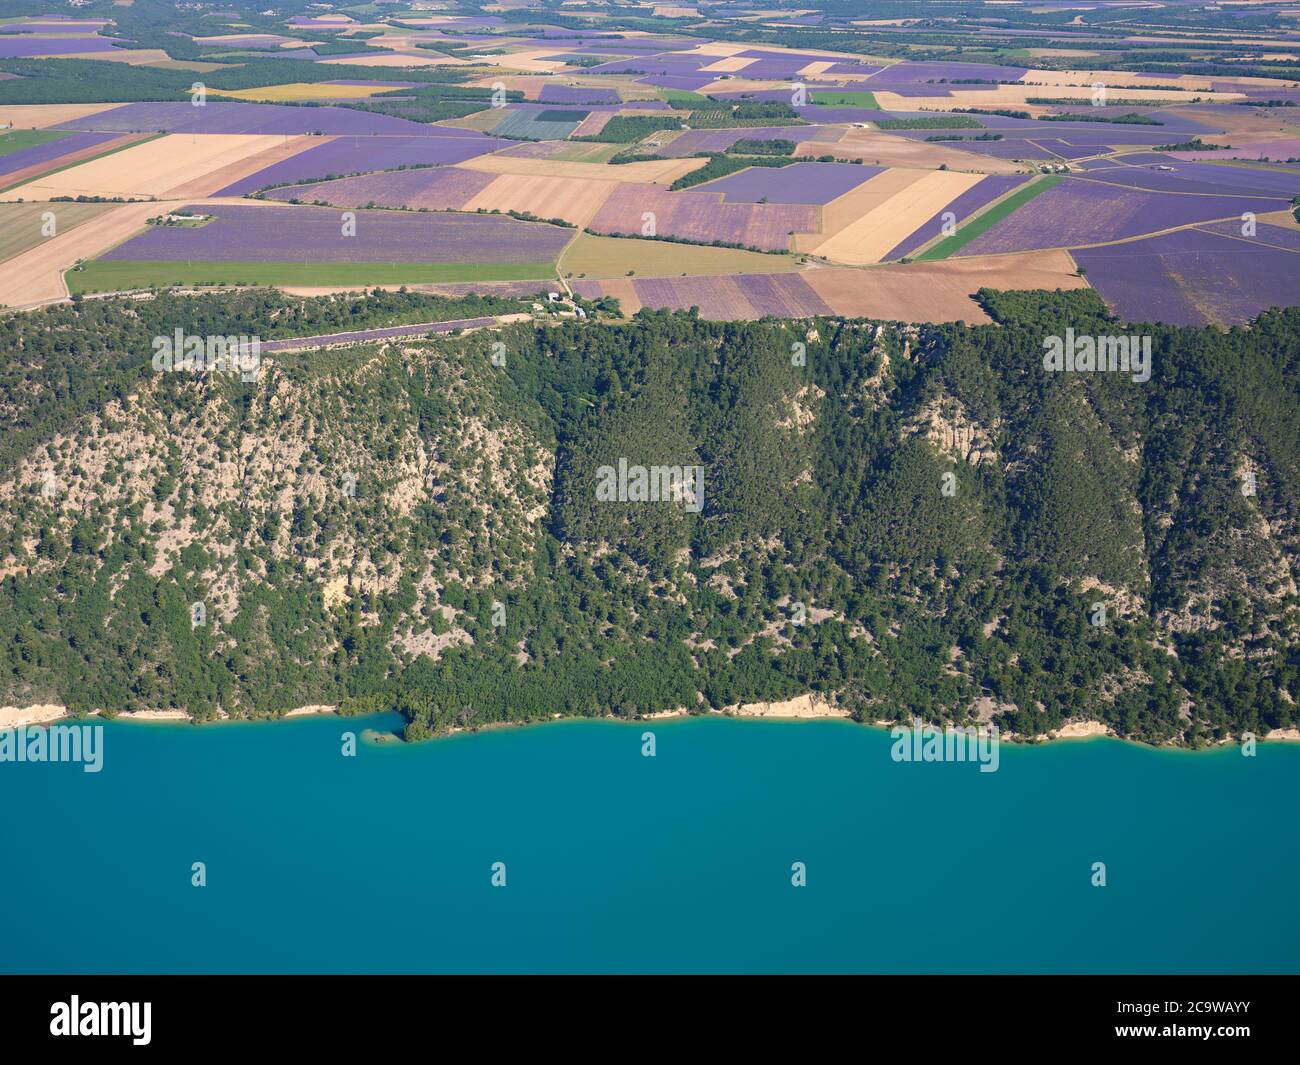 AERIAL VIEW. Lavender fields on the Valensole Plateau overlooking Lake Sainte-Croix. Moustiers-Sainte-Marie, Provence, France. Stock Photo